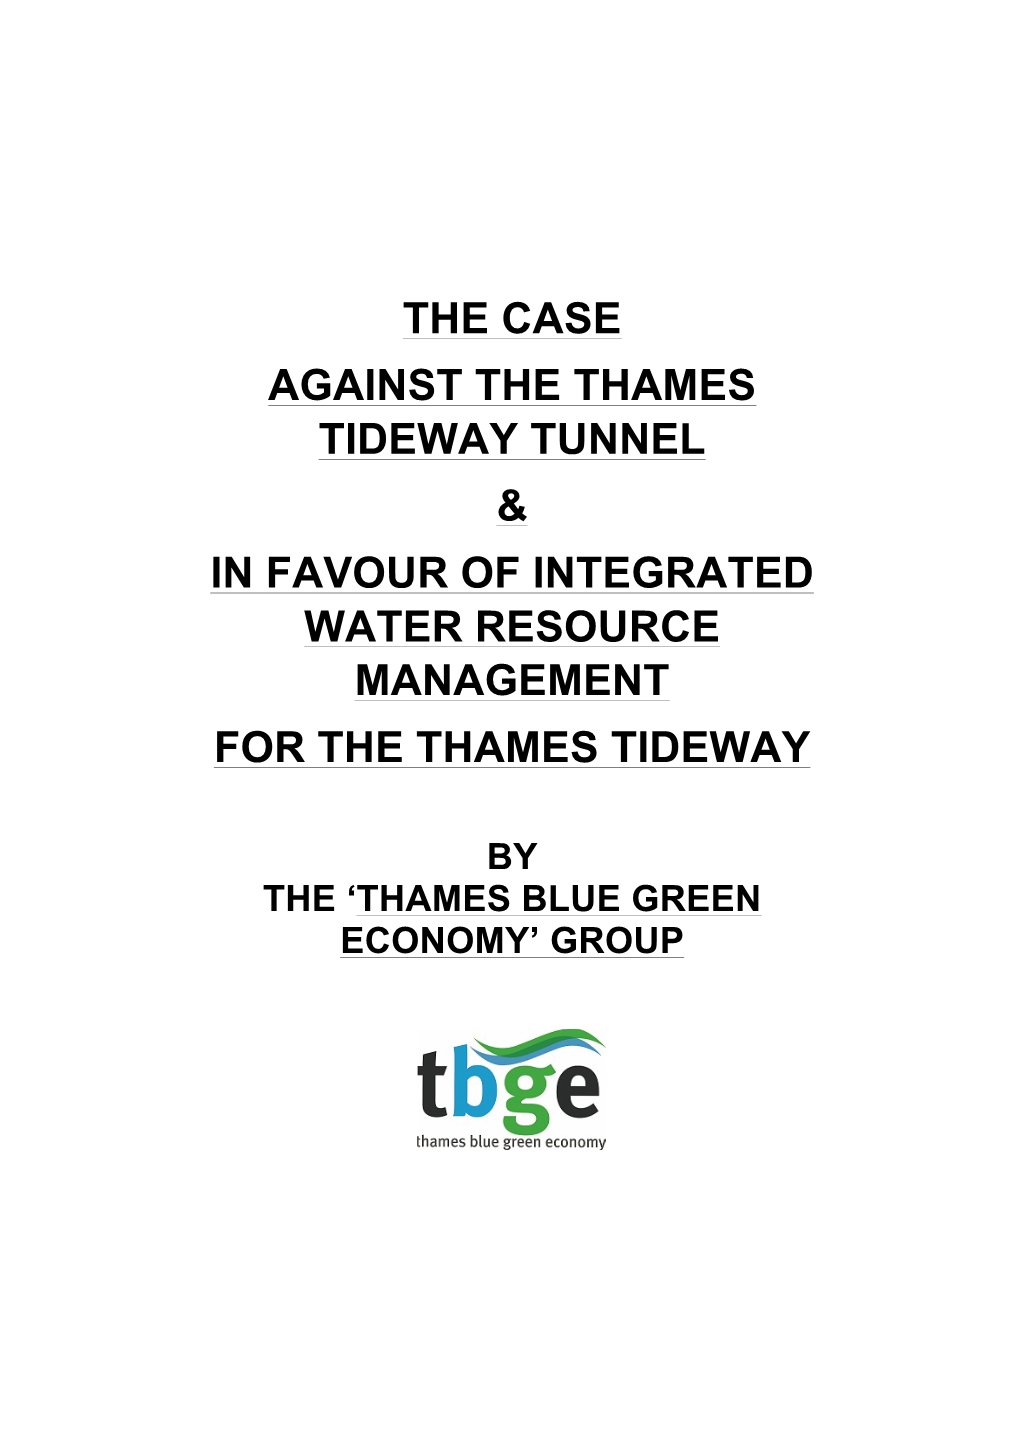 Case Against the Thames Tideway Tunnel & in Favour of Integrated Water Resource Management